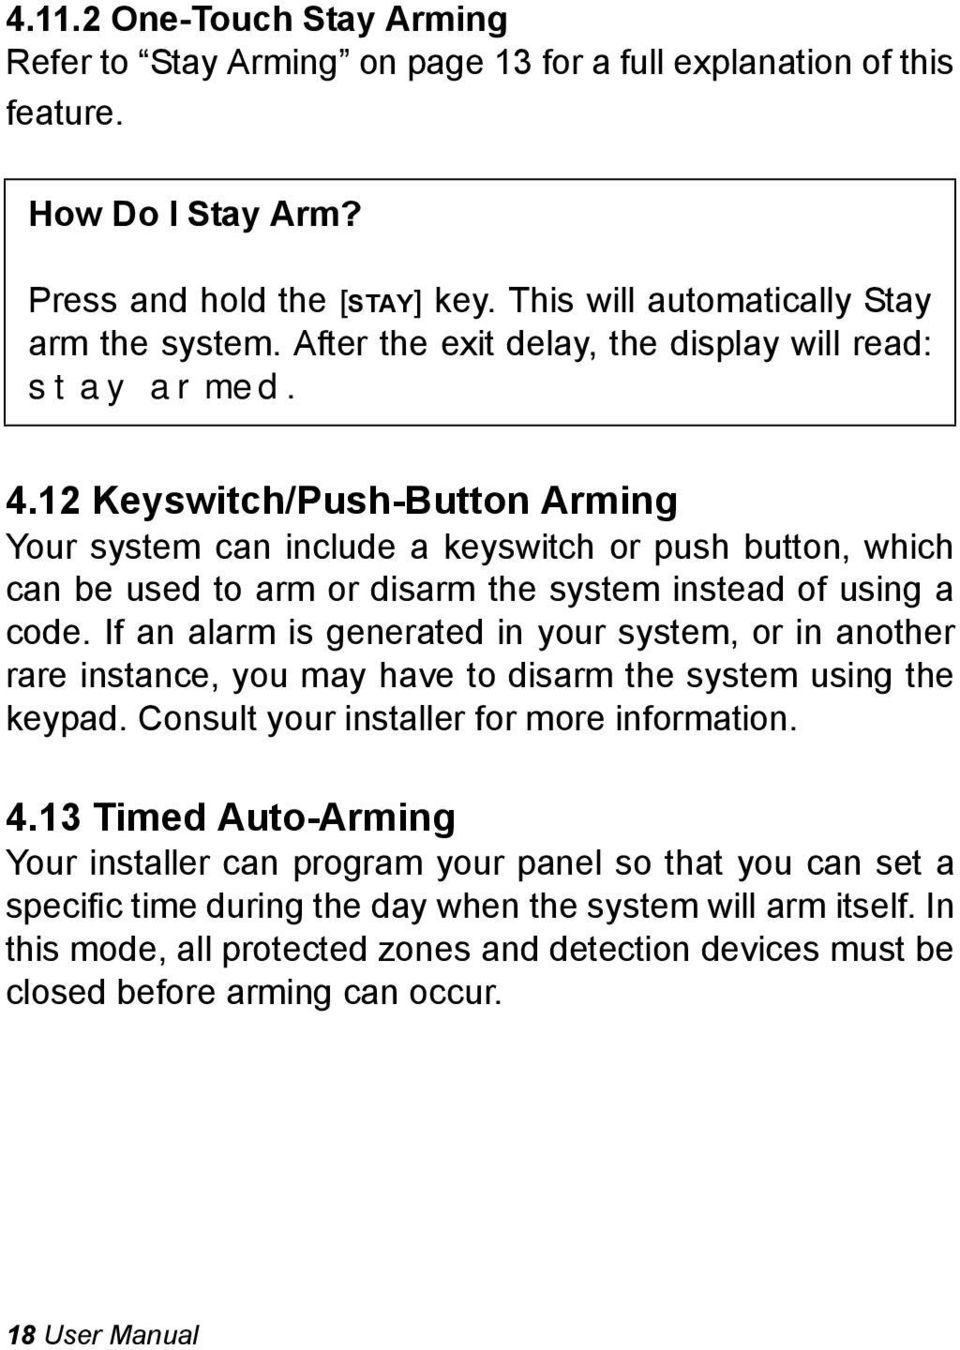 12 Keyswitch/Push-Button Arming Your system can include a keyswitch or push button, which can be used to arm or disarm the system instead of using a code.